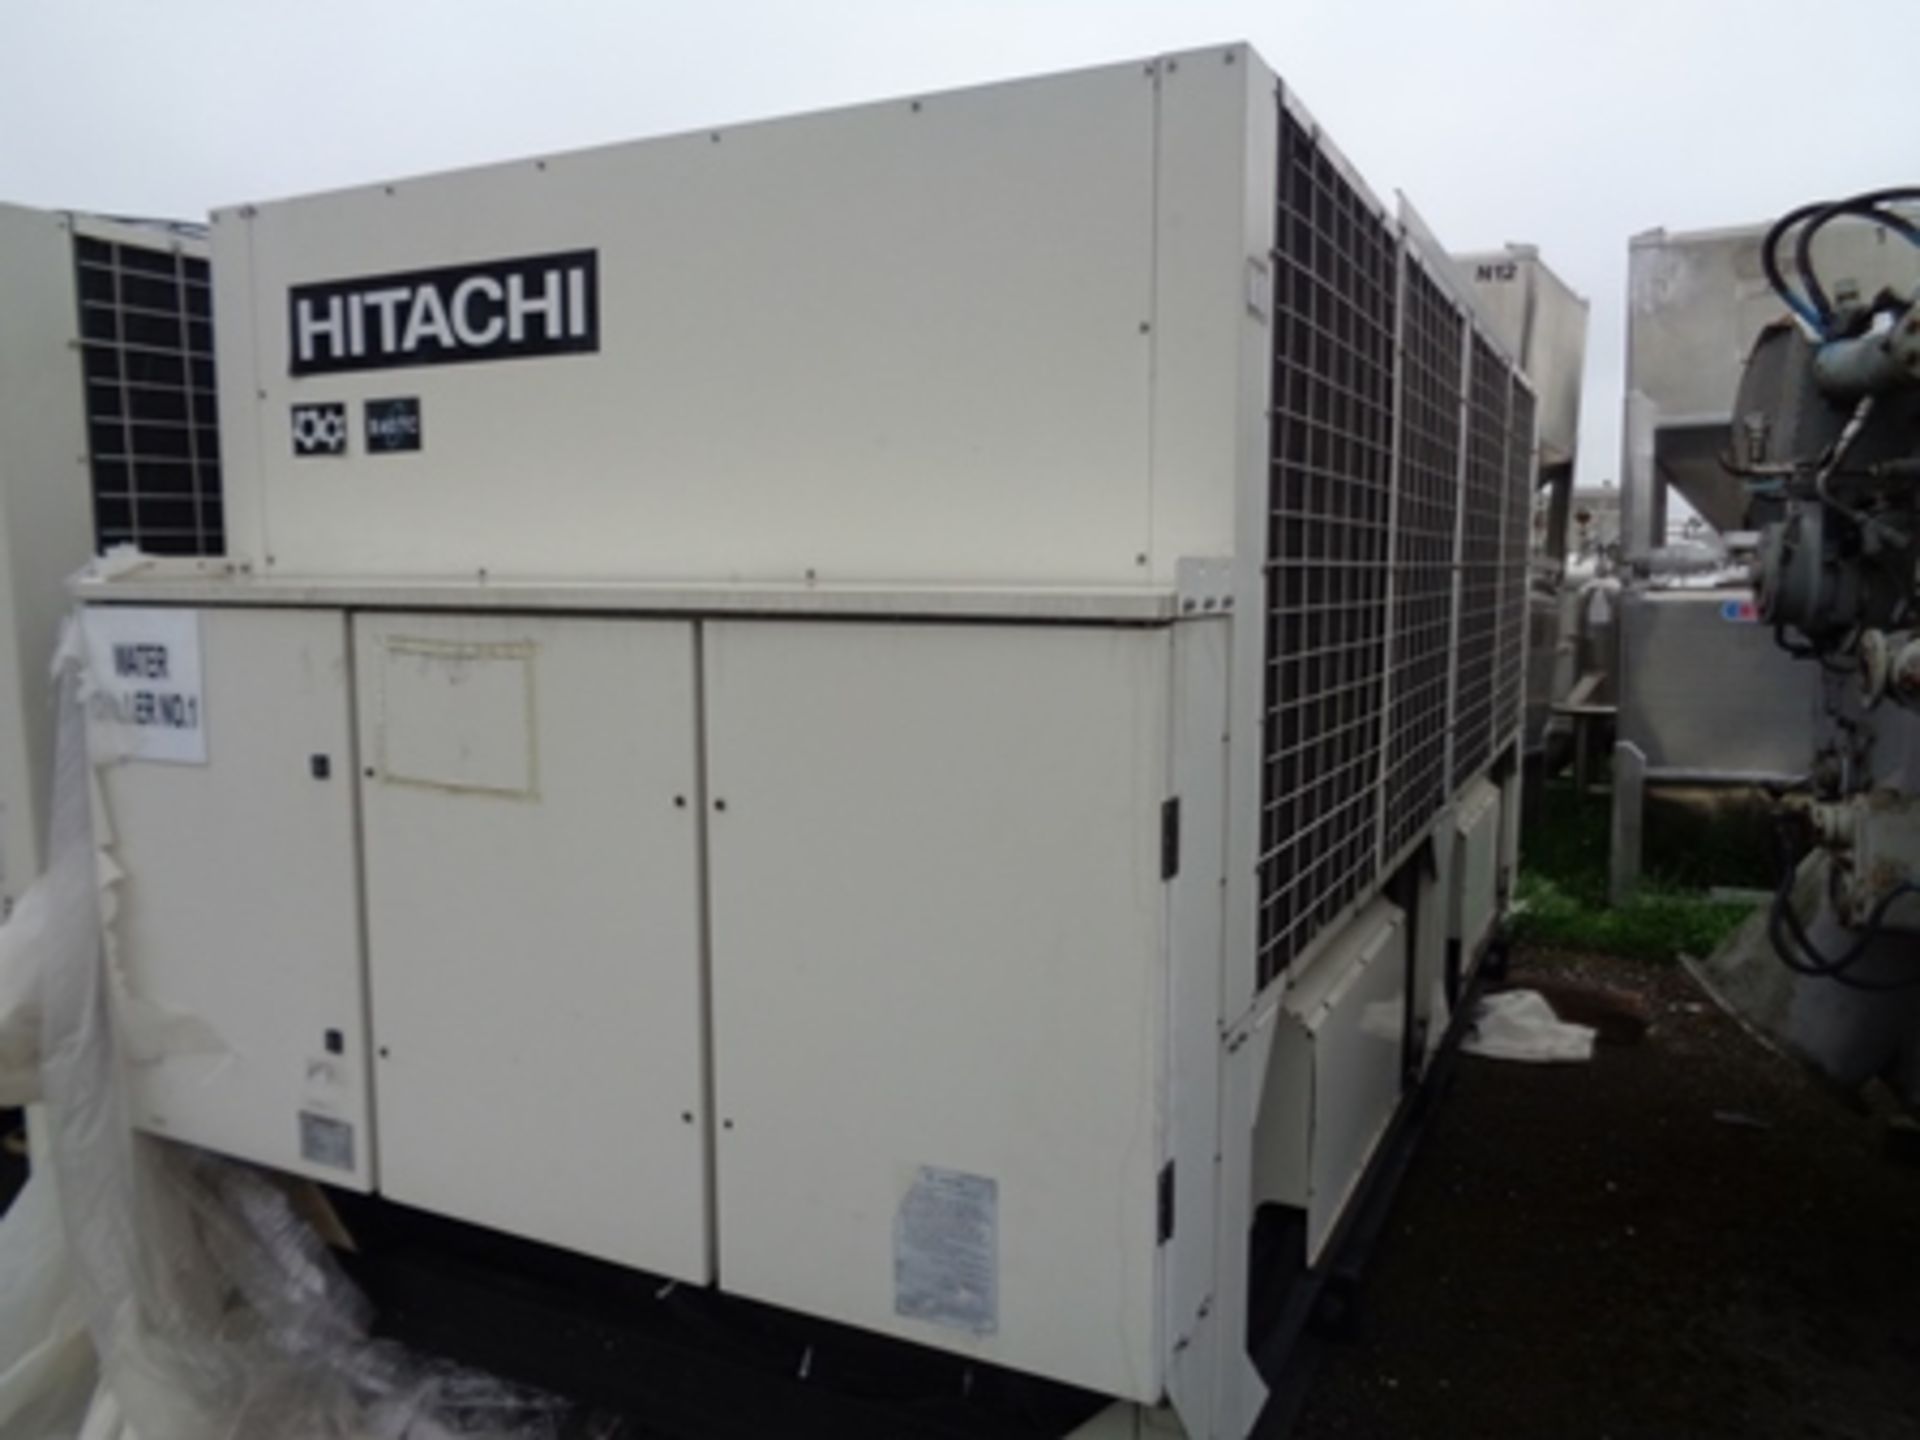 Hitachi ""H Series"" air cooled chiller model RCUG 150AHYZ1. 103 tons. new 2011. Chiller utilizes - Image 2 of 4